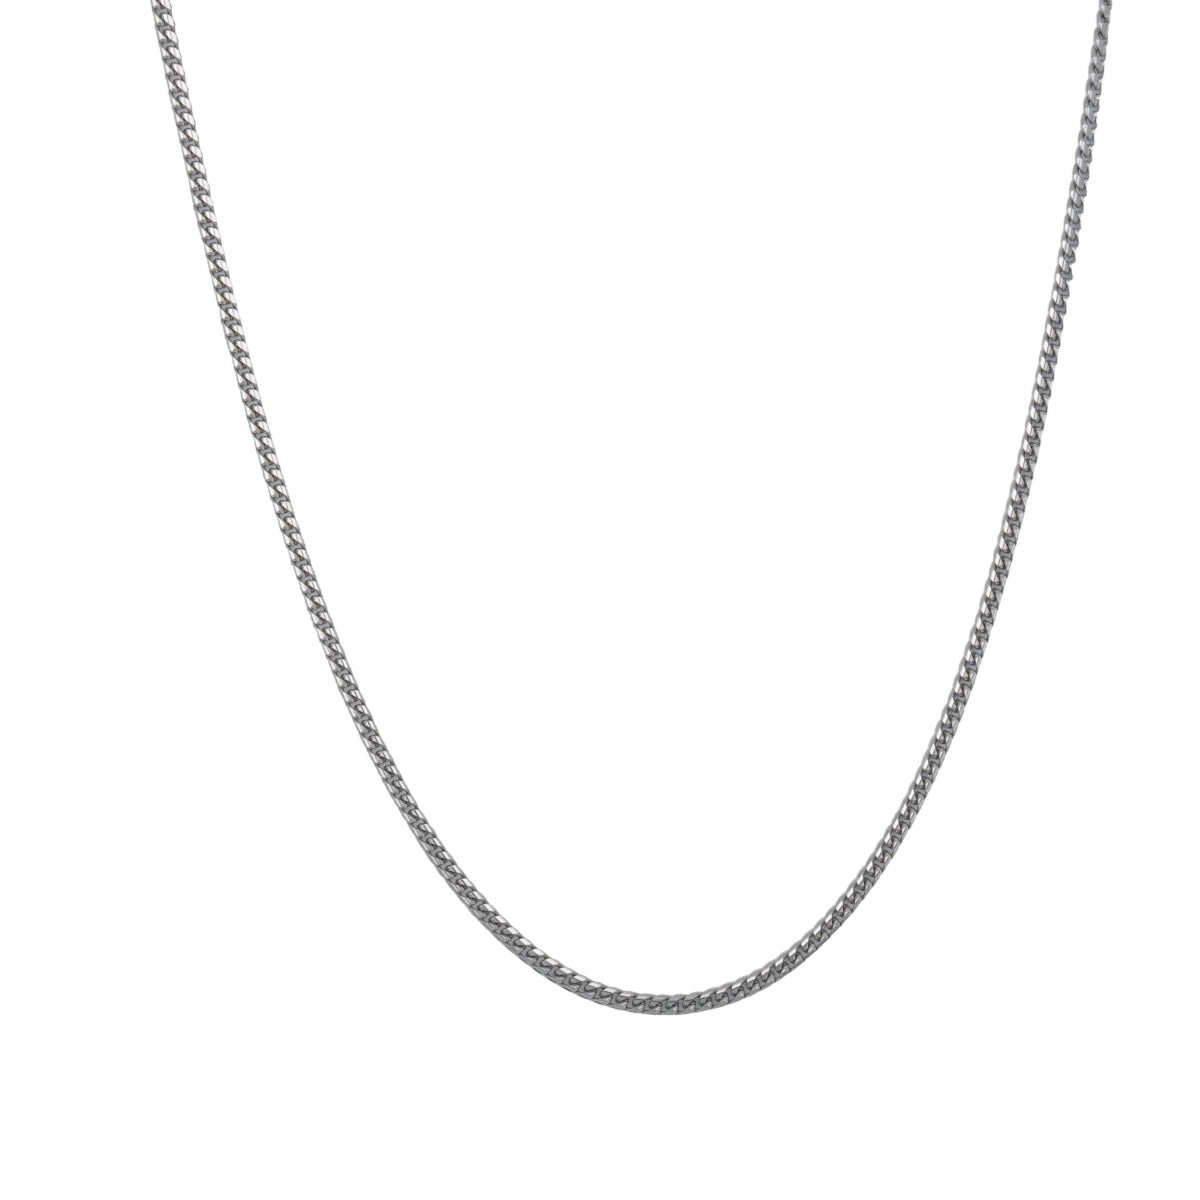 Silver Cuban Chain Necklace (4mm)